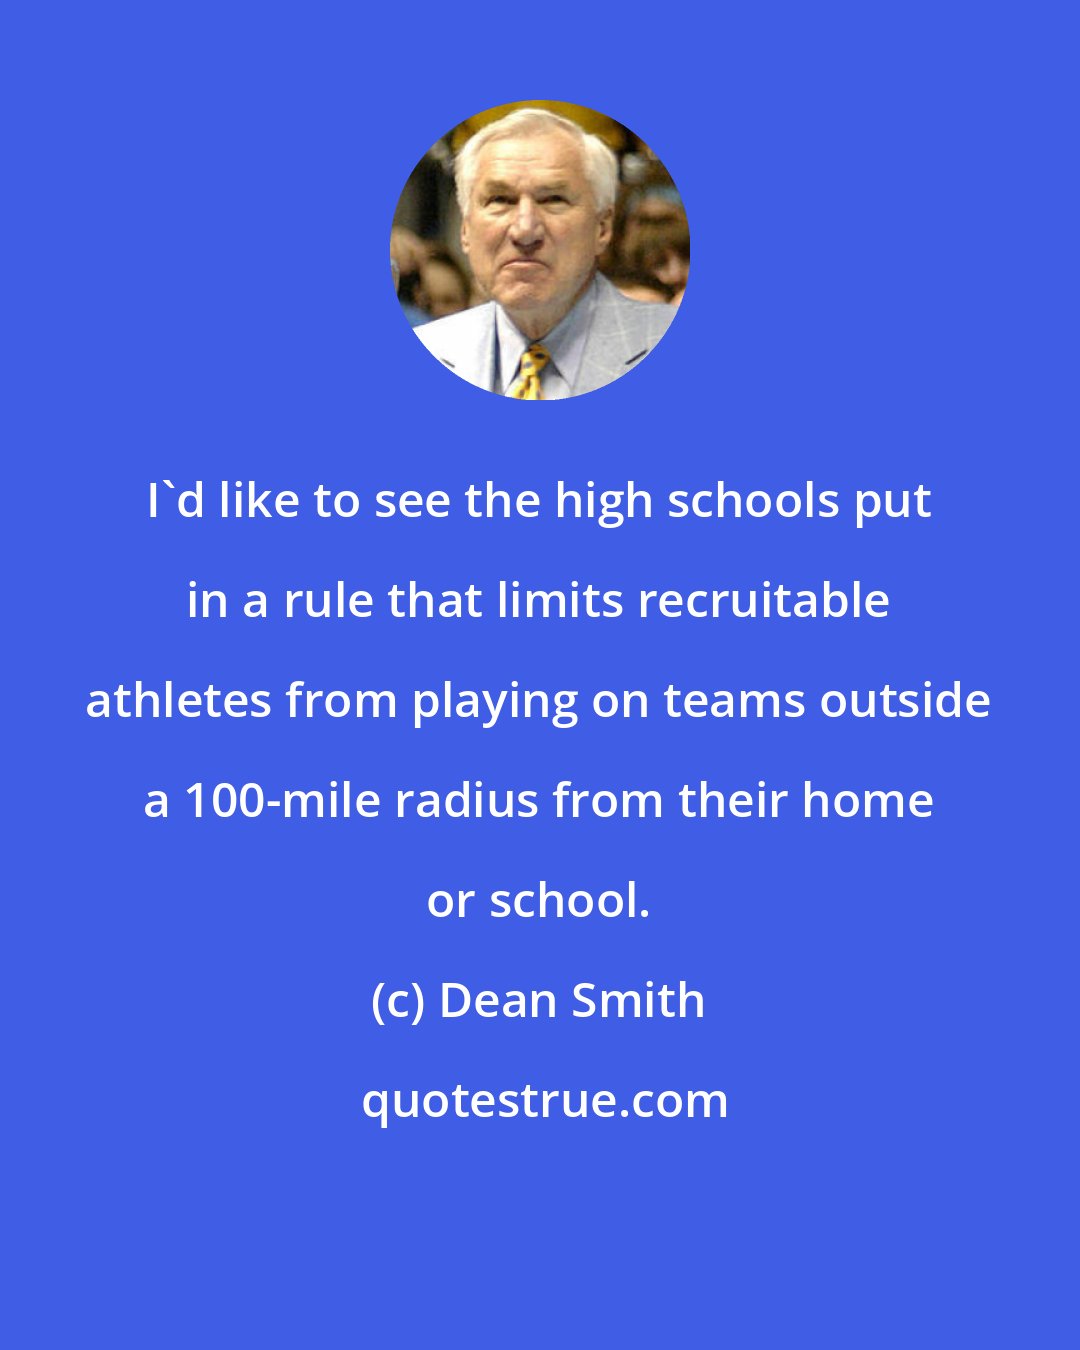 Dean Smith: I'd like to see the high schools put in a rule that limits recruitable athletes from playing on teams outside a 100-mile radius from their home or school.